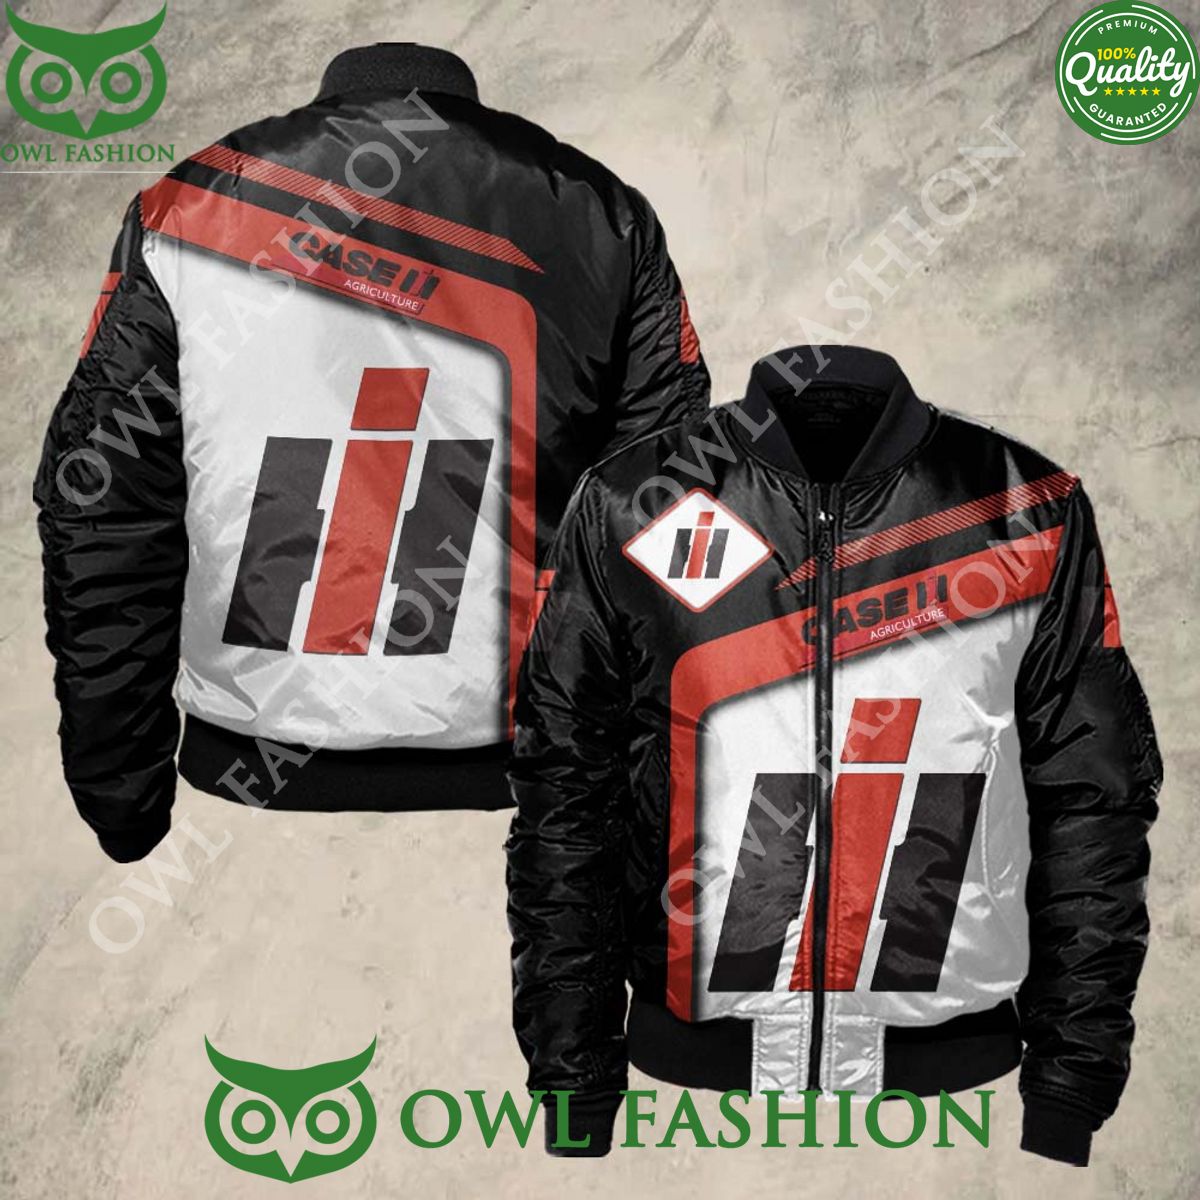 Case IH Car Bomber Jacket Printed How did you learn to click so well